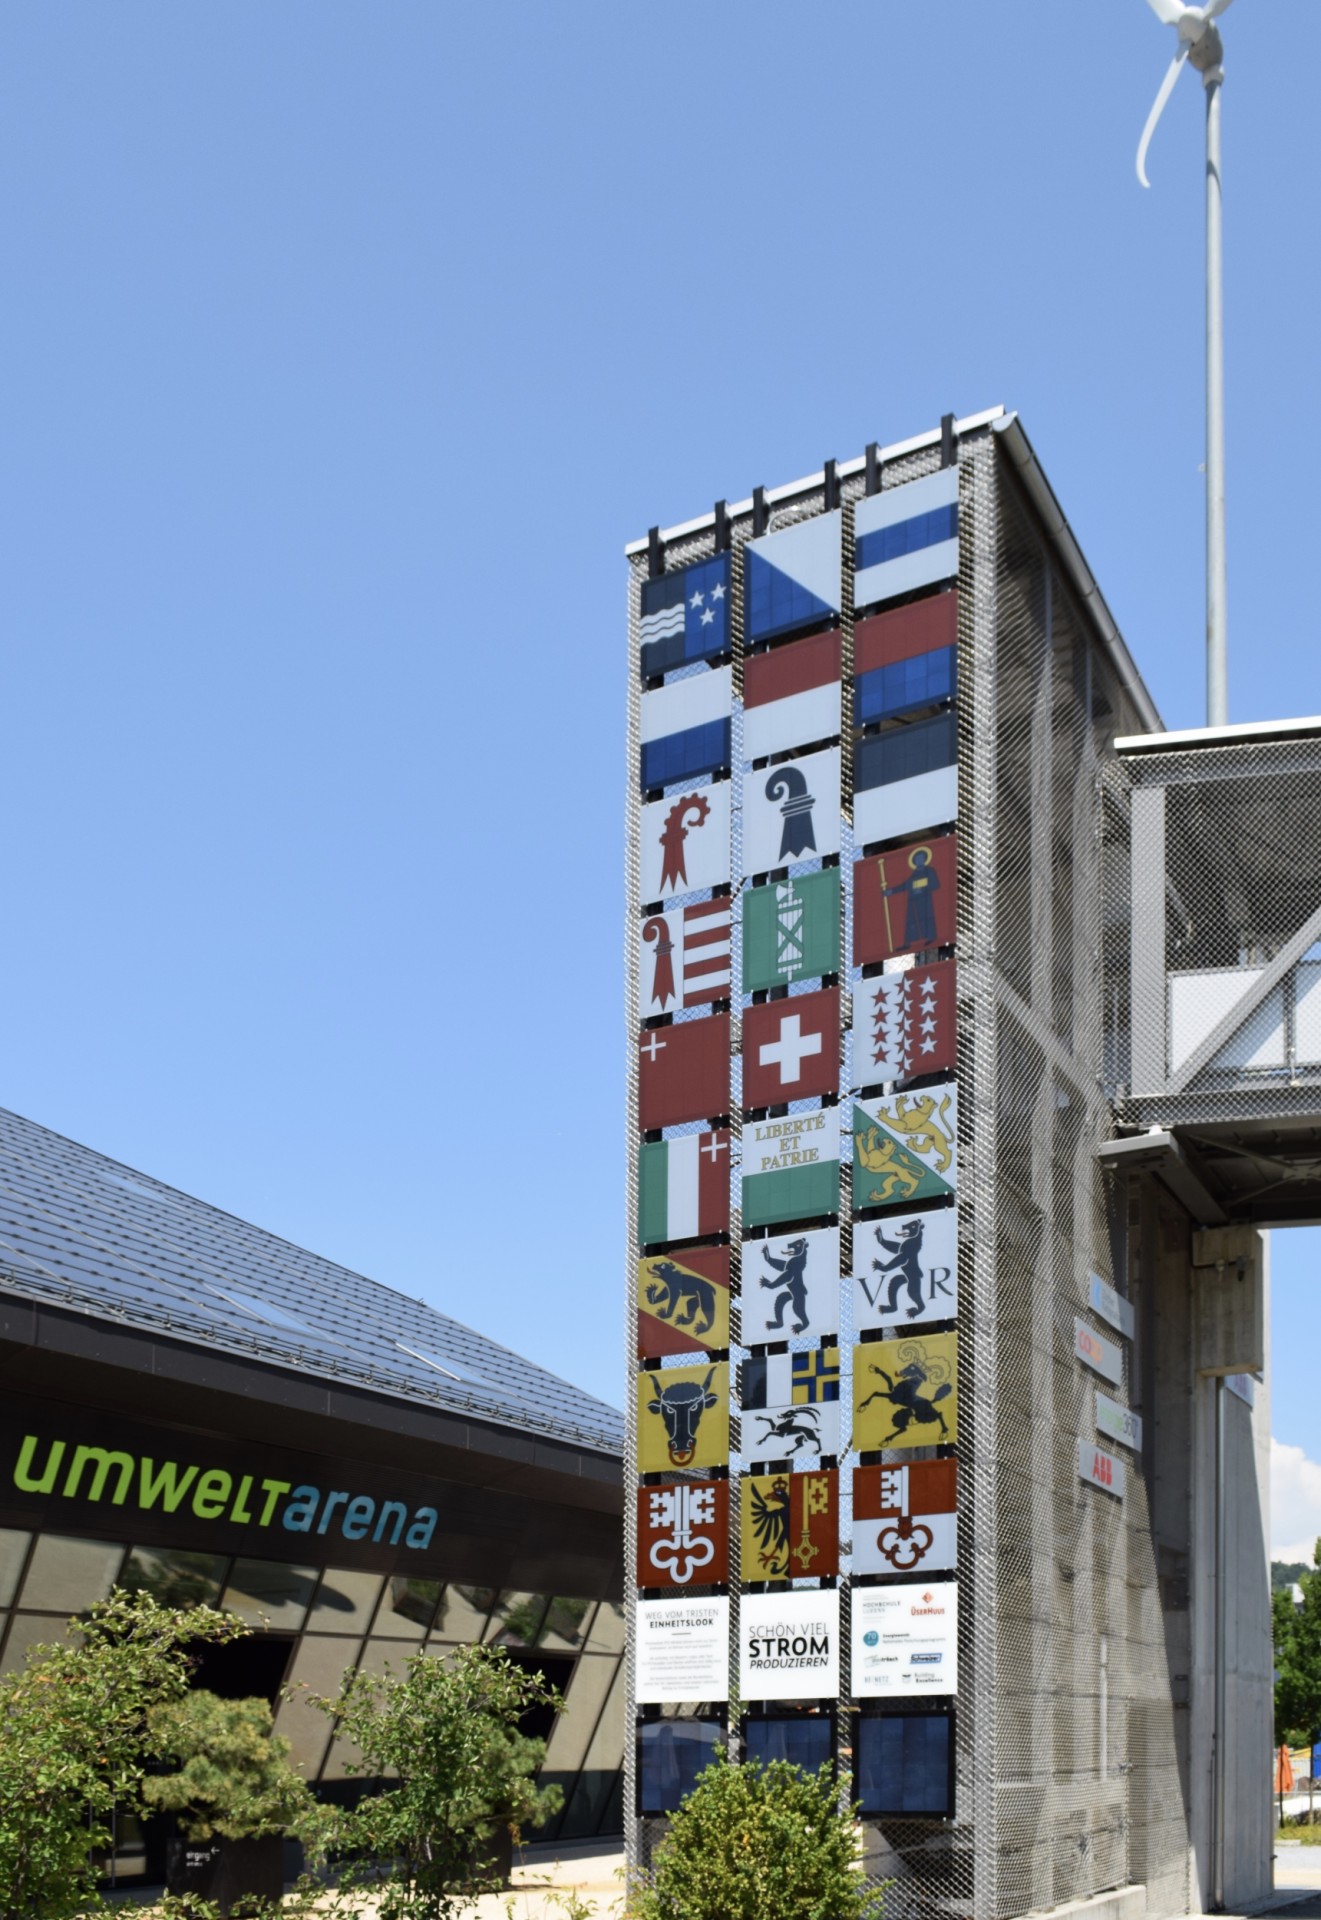 PV modules with the cantonal coats of arms on the stair tower of the Umwelt Arena Schweiz in Spreitenbach.